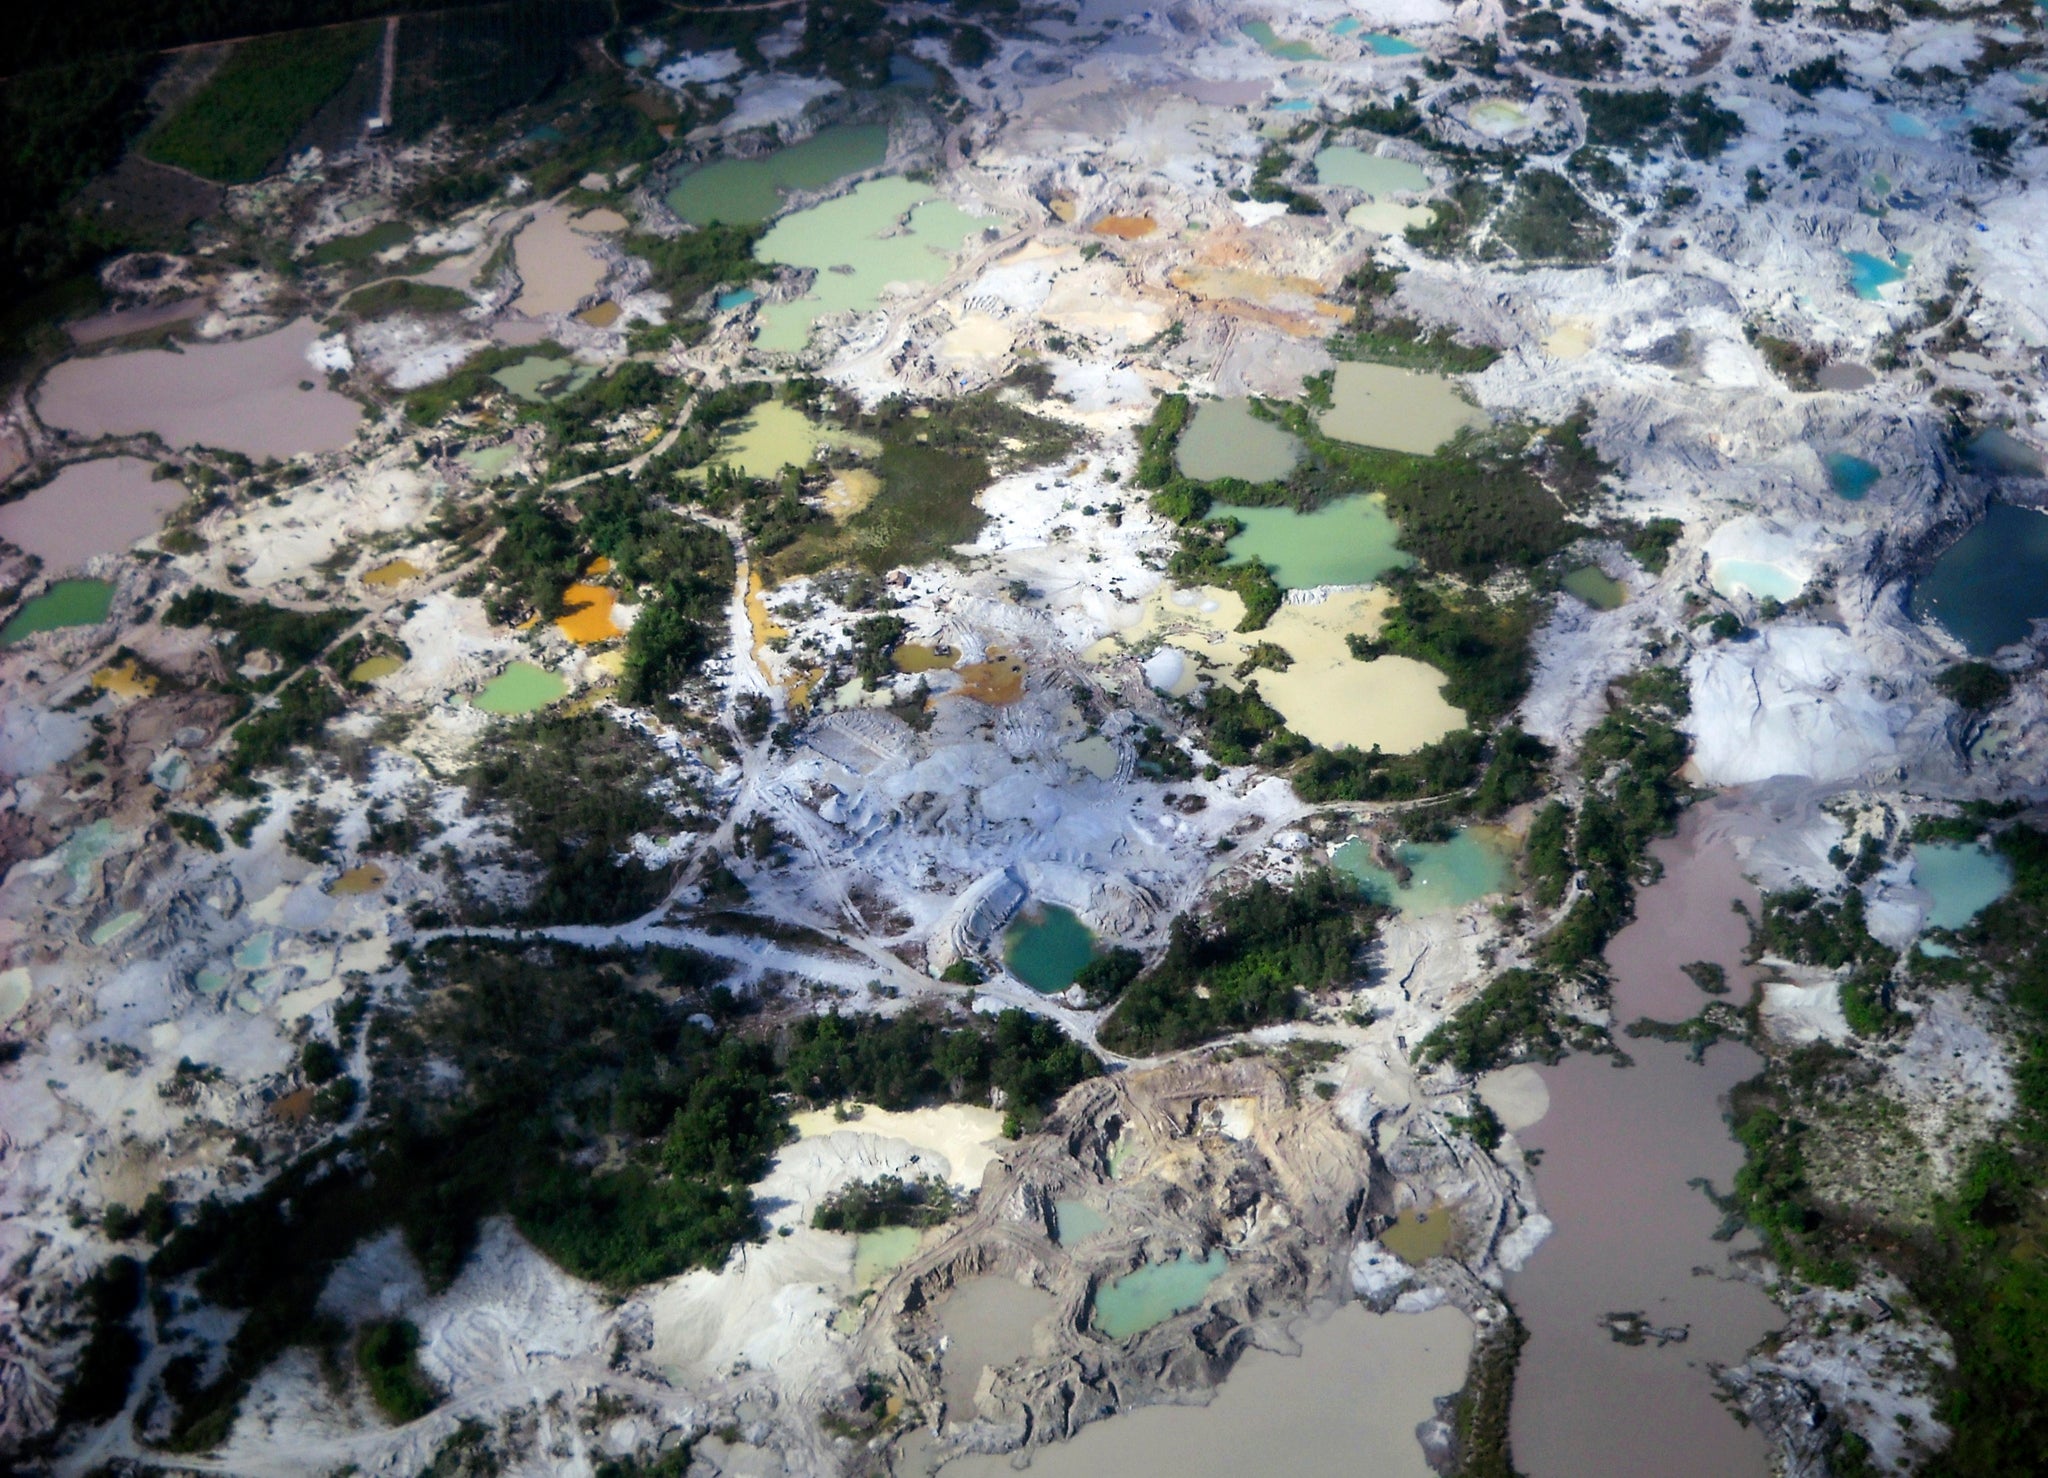 An aerial view of the environmental damage caused by tin mining in Indonesia's Bangka Belitung province May 18, 2010. REUTERS/Dwi Satmoko